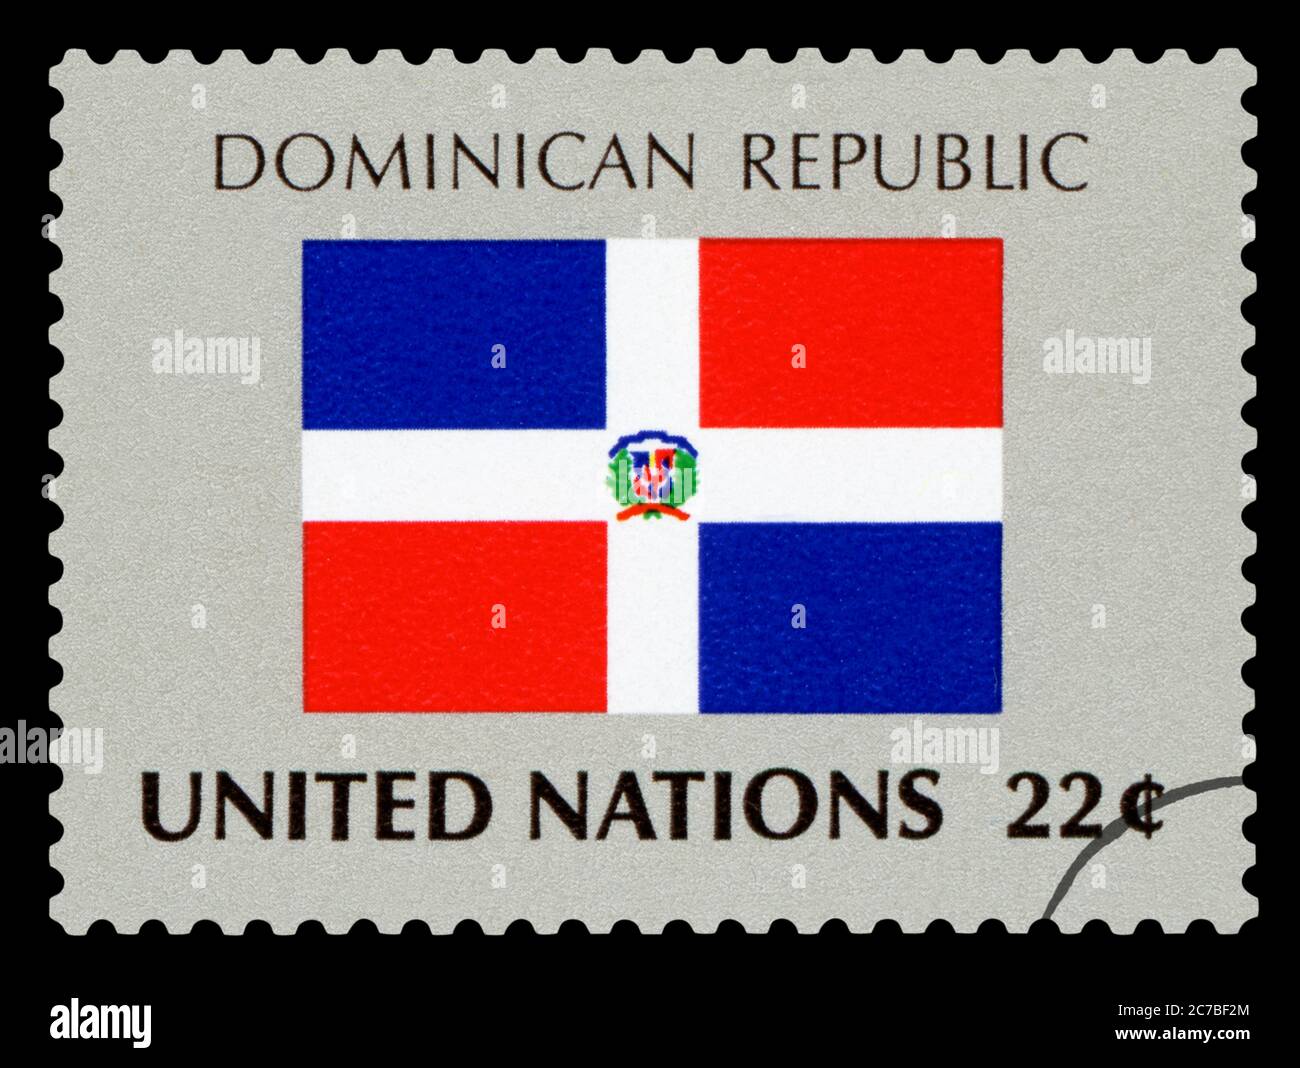 DOMINICAN REPUBLIC - Postage Stamp of Dominican Republic national flag, Series of United Nations, circa 1984. Isolated on black background. Stock Photo